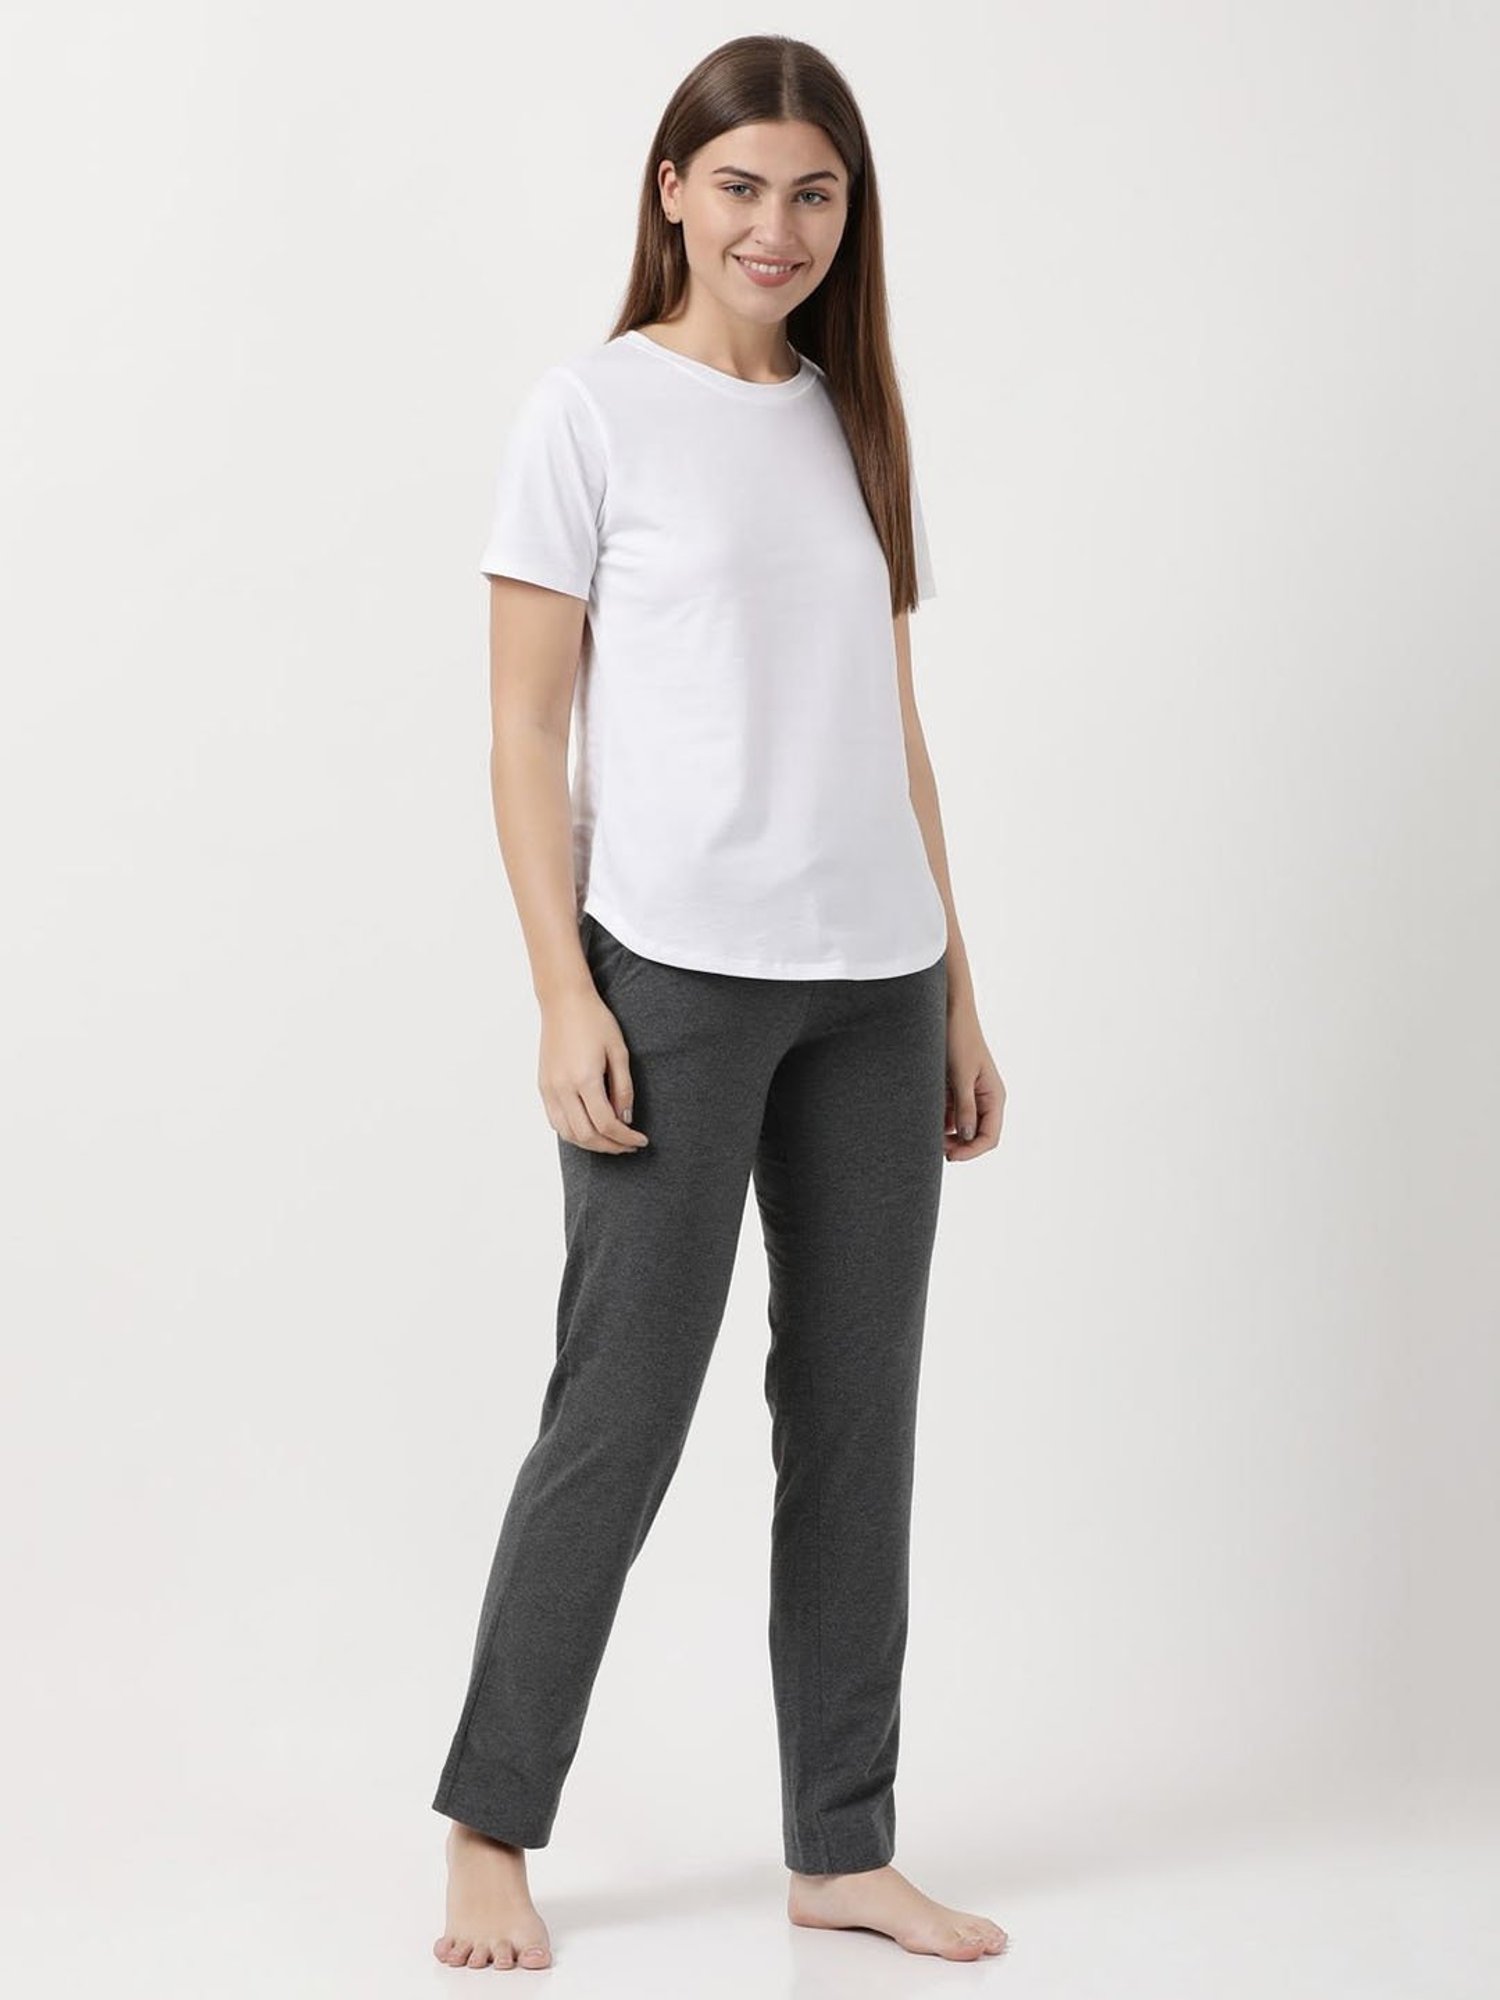 Jockey Womens Cotton Contrast Side Piping and Pockets Track pant 1305   Online Shopping site in India